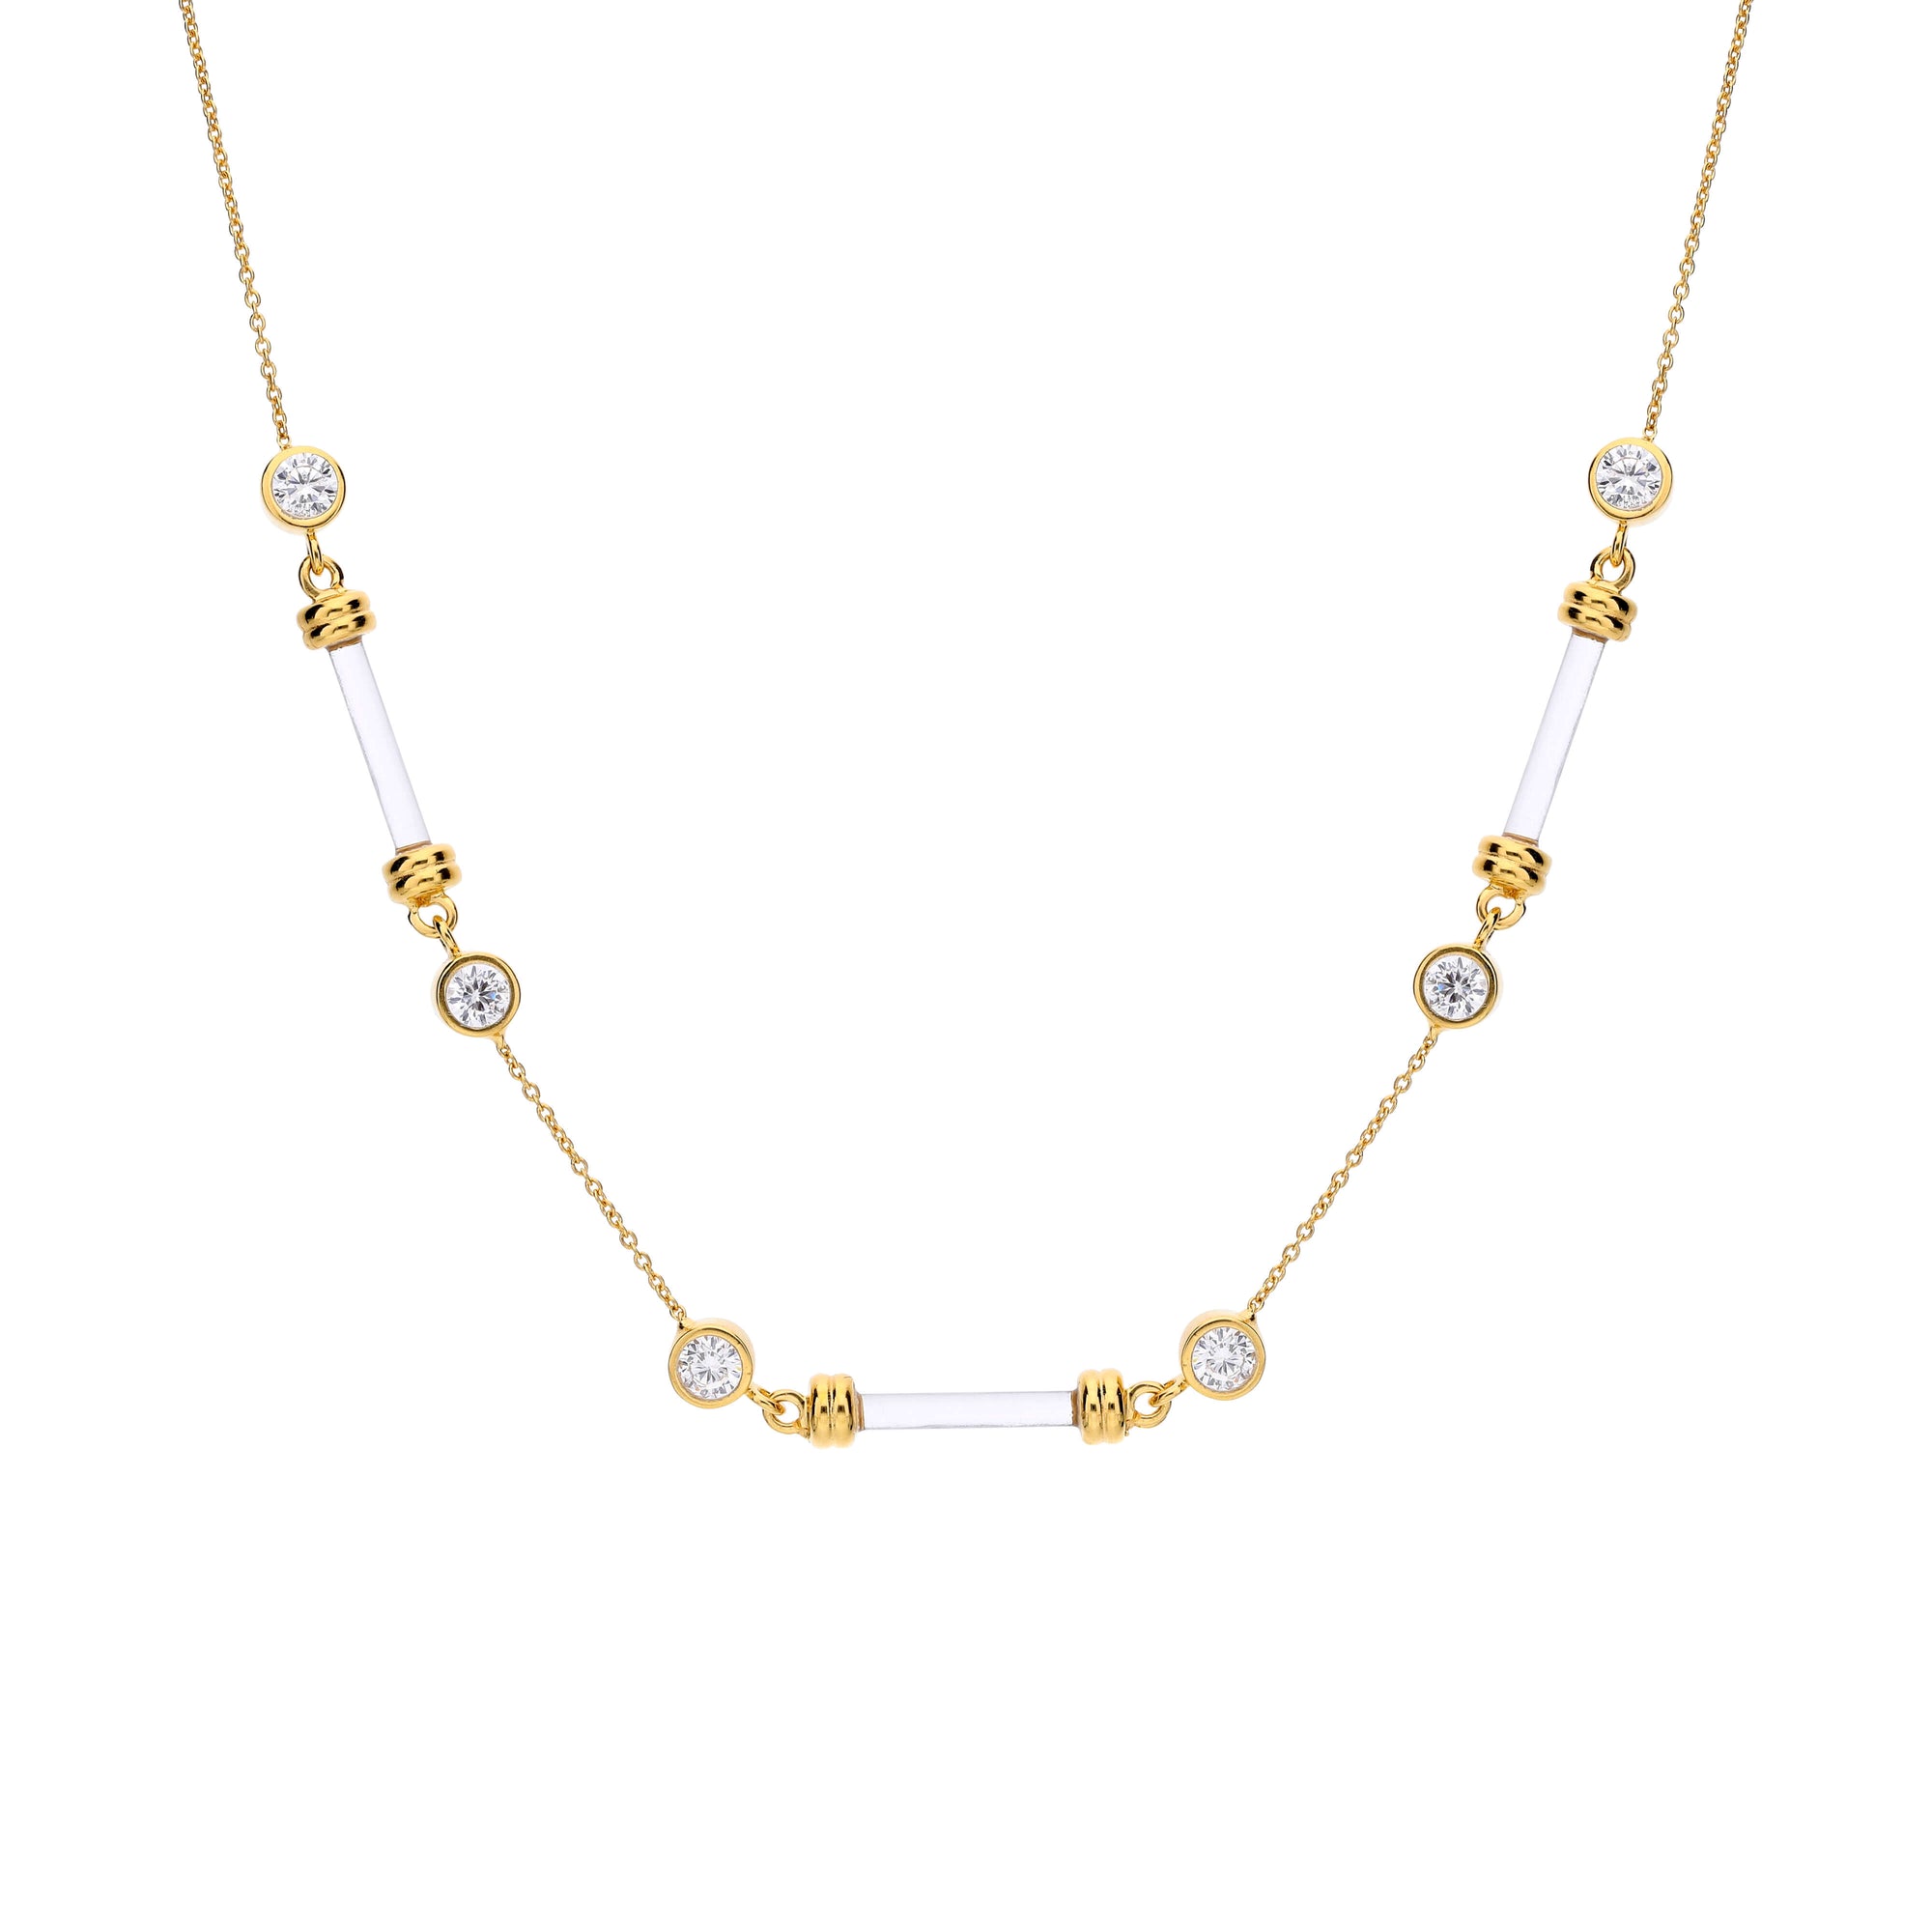 Clear and gold dainty necklace